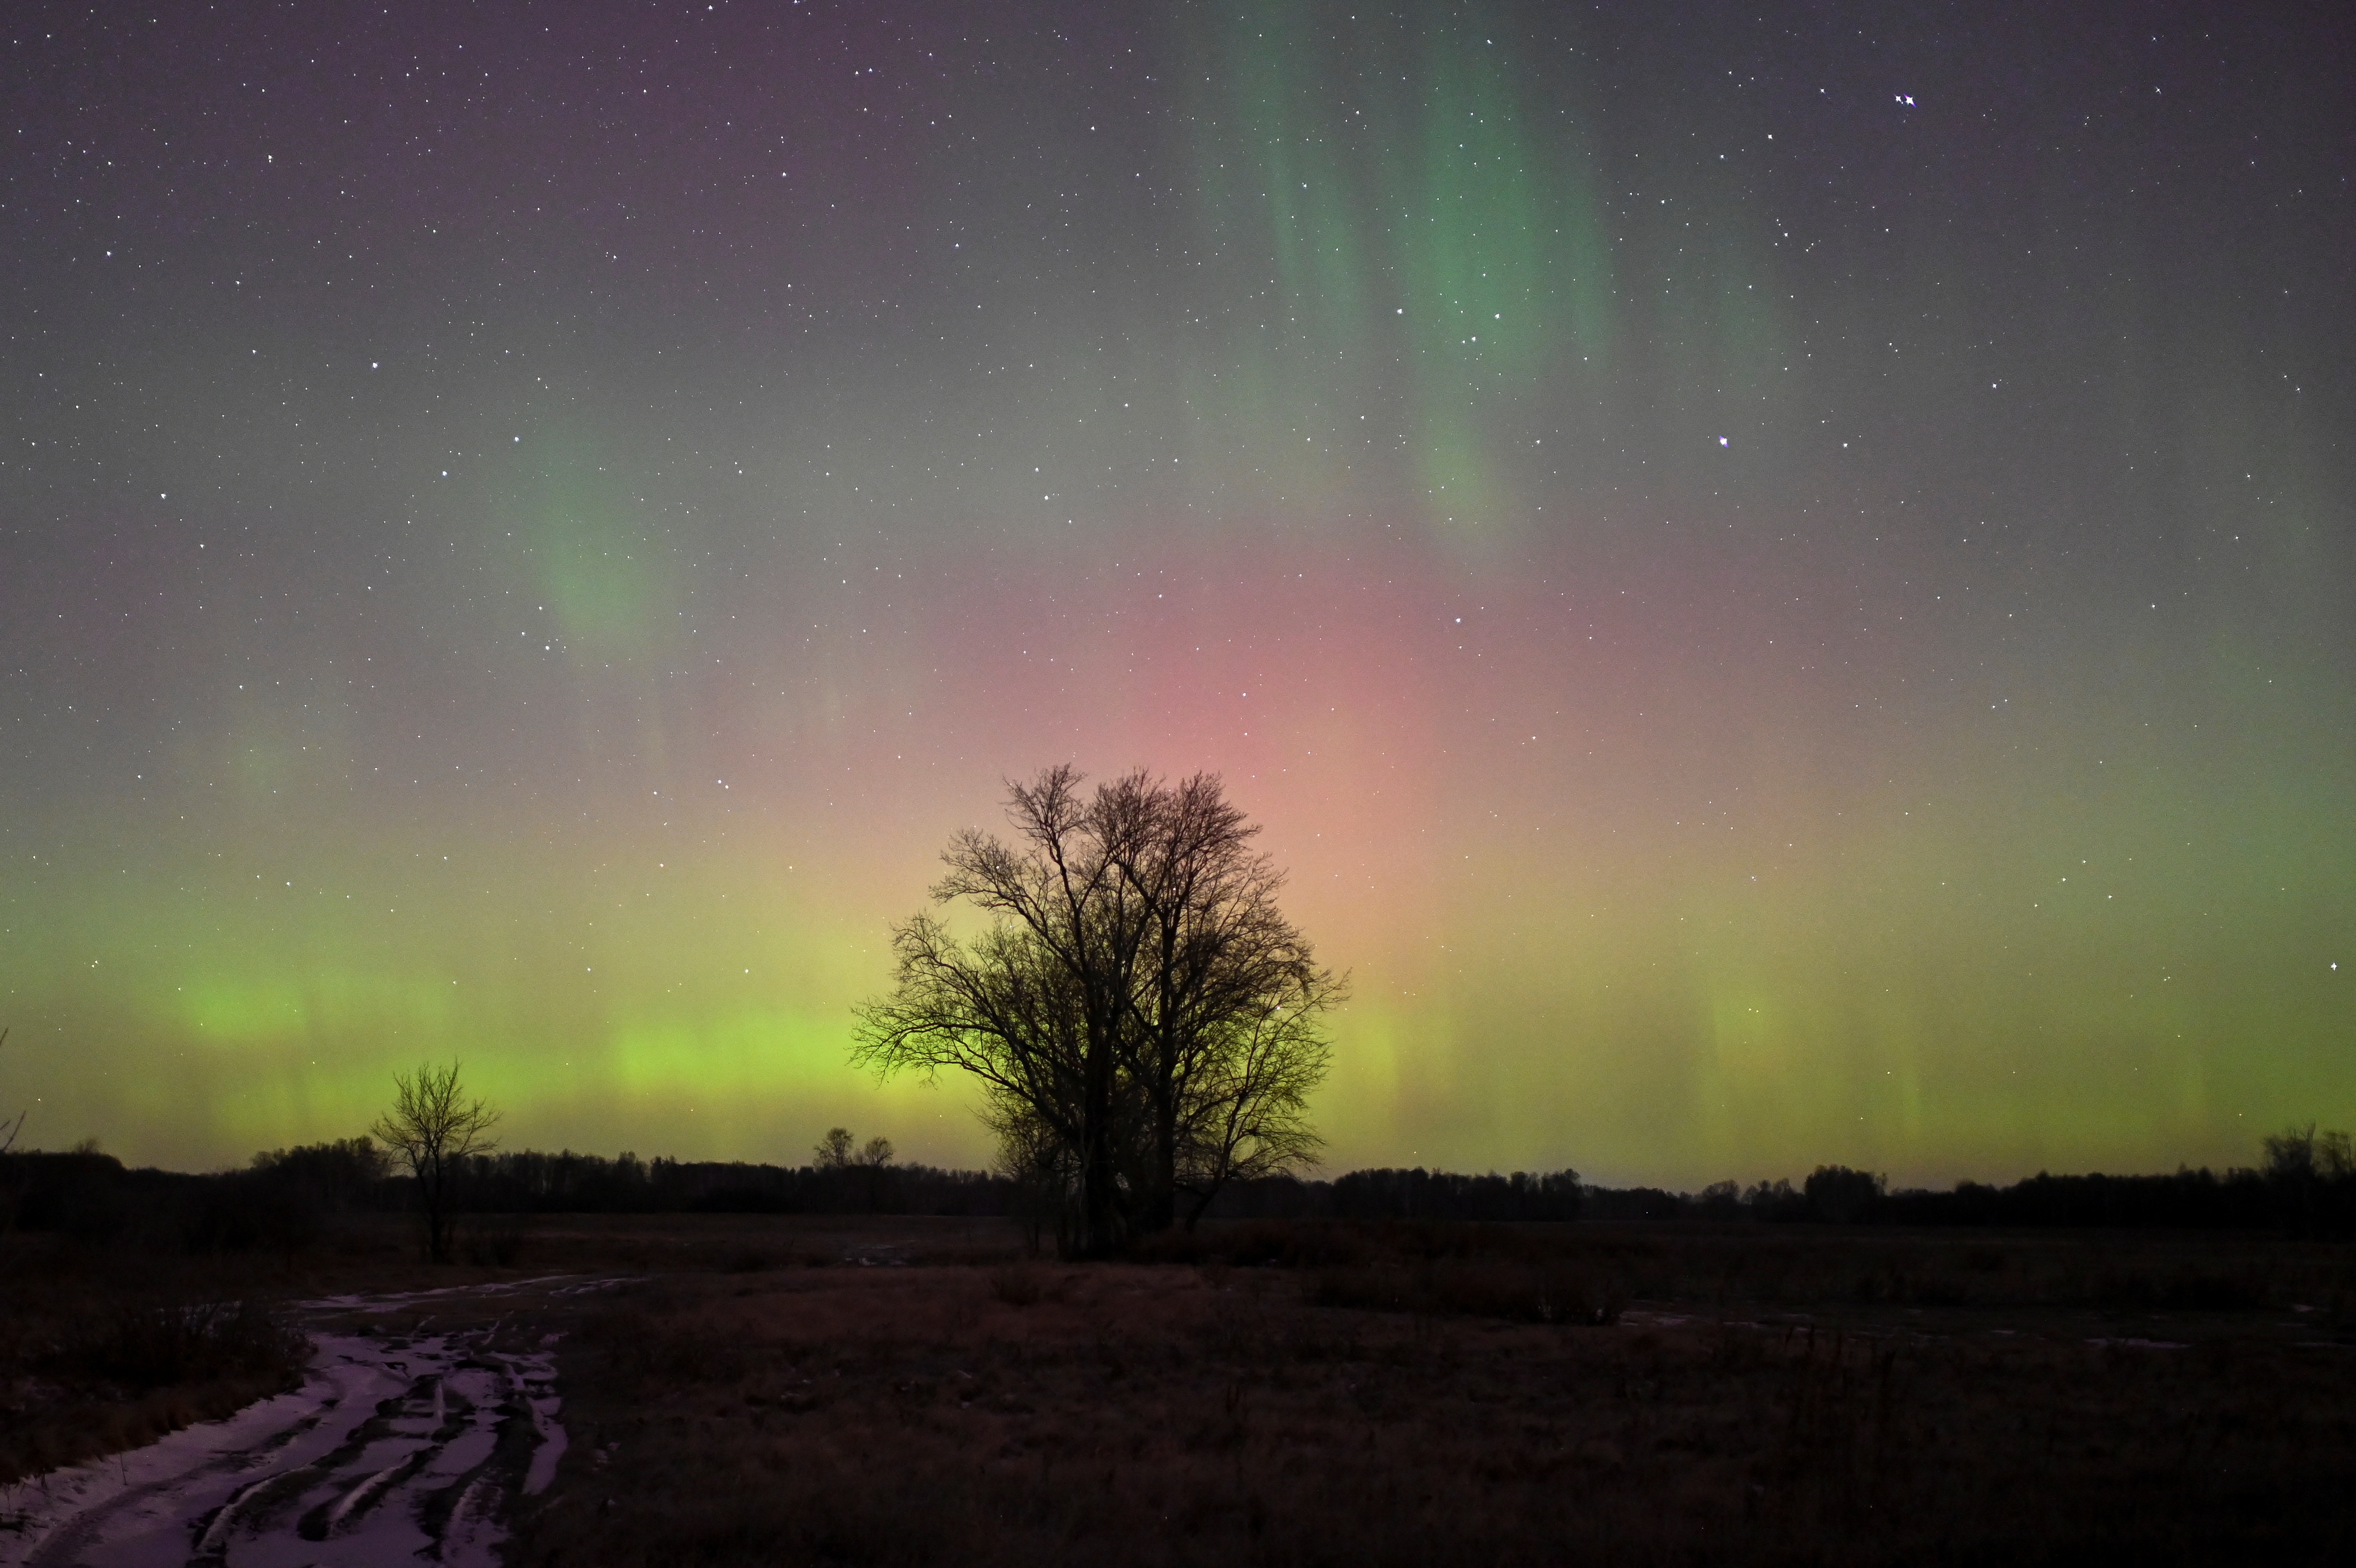 Auroras, caused by a coronal mass ejection on the Sun, illuminate the skies in Omsk region